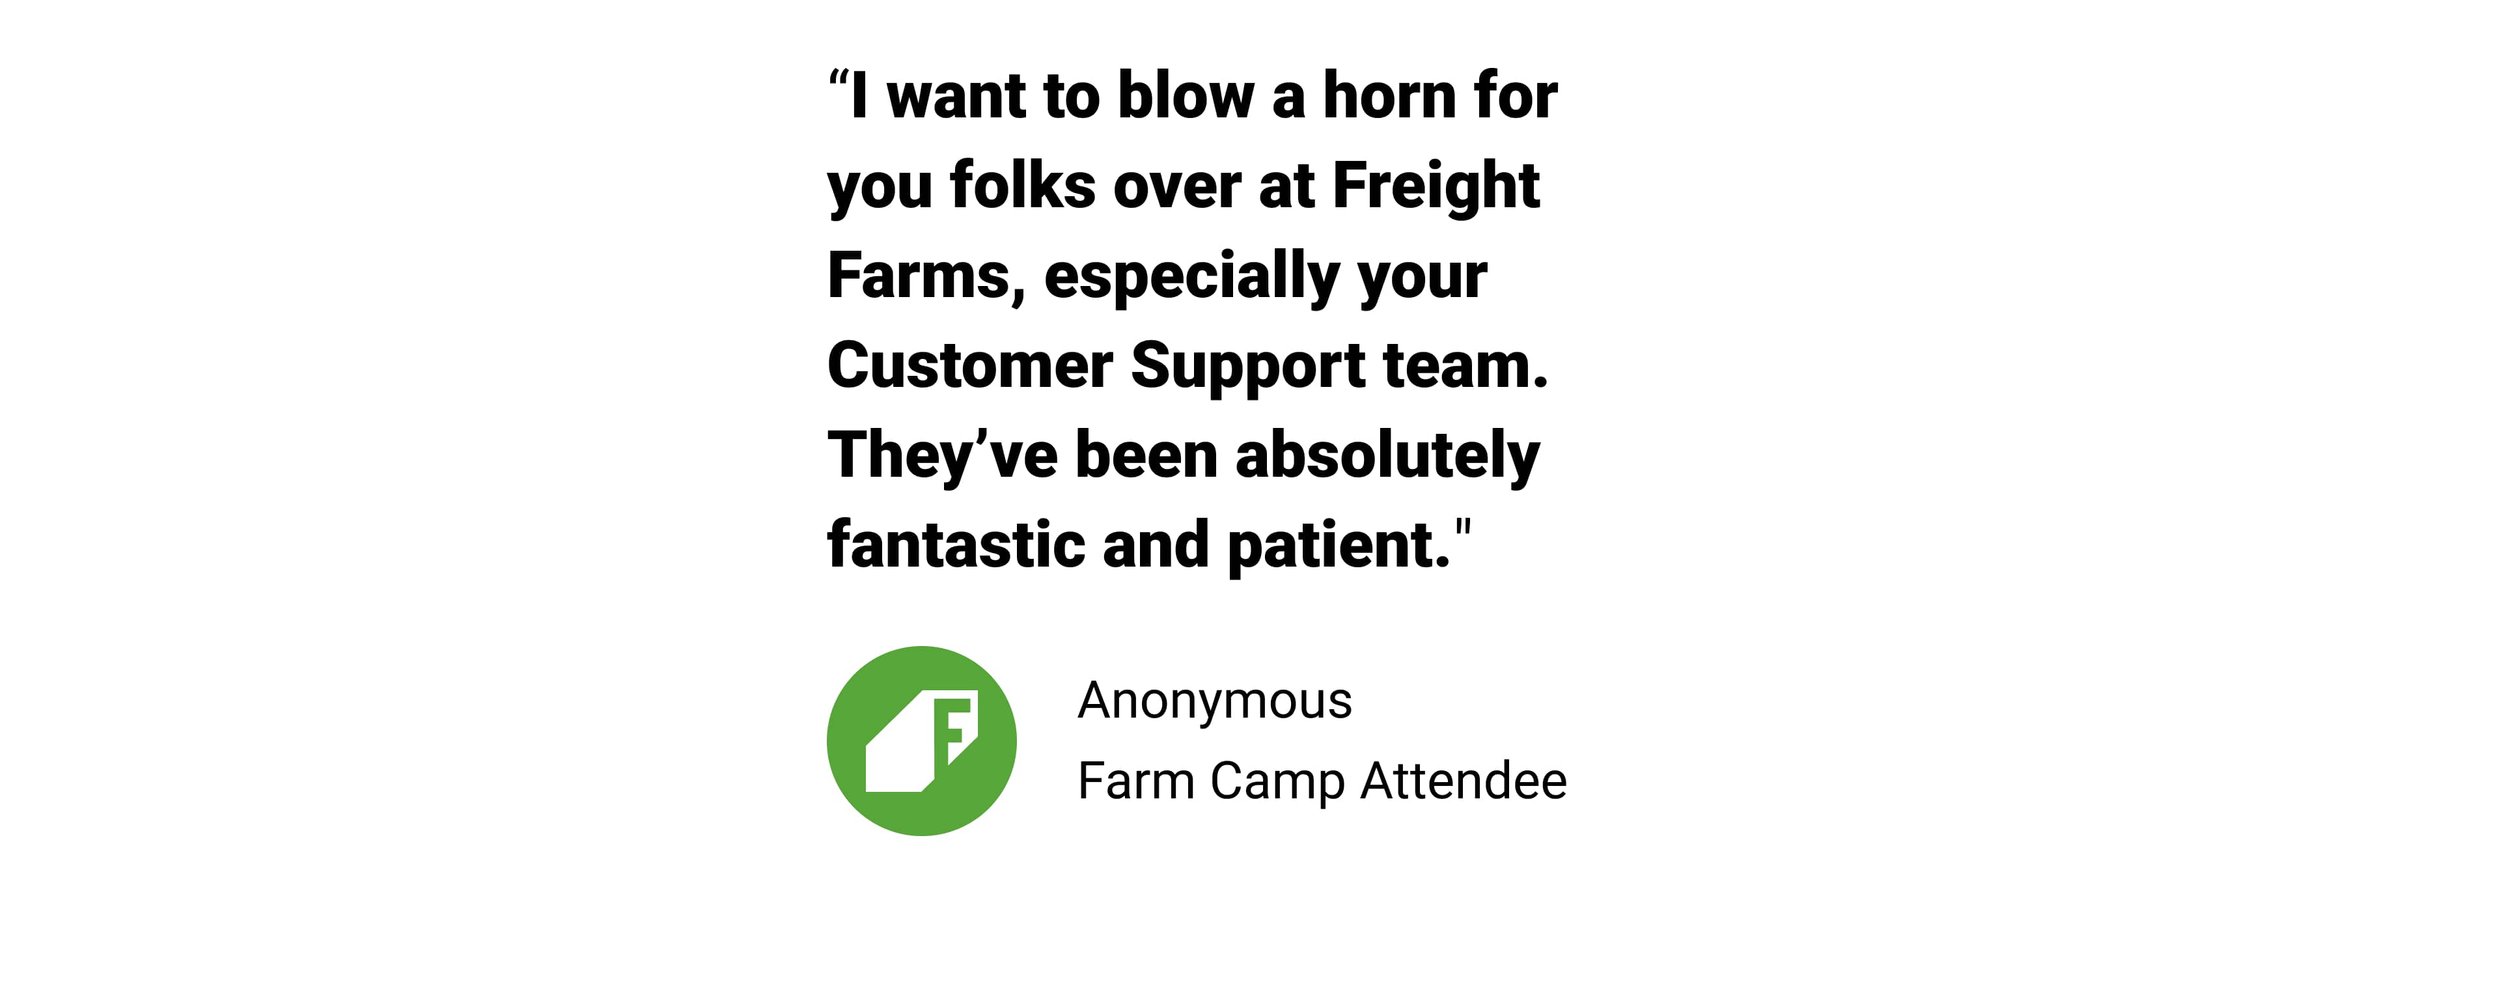 New Freight Farmer Guide Quote 3.jpg